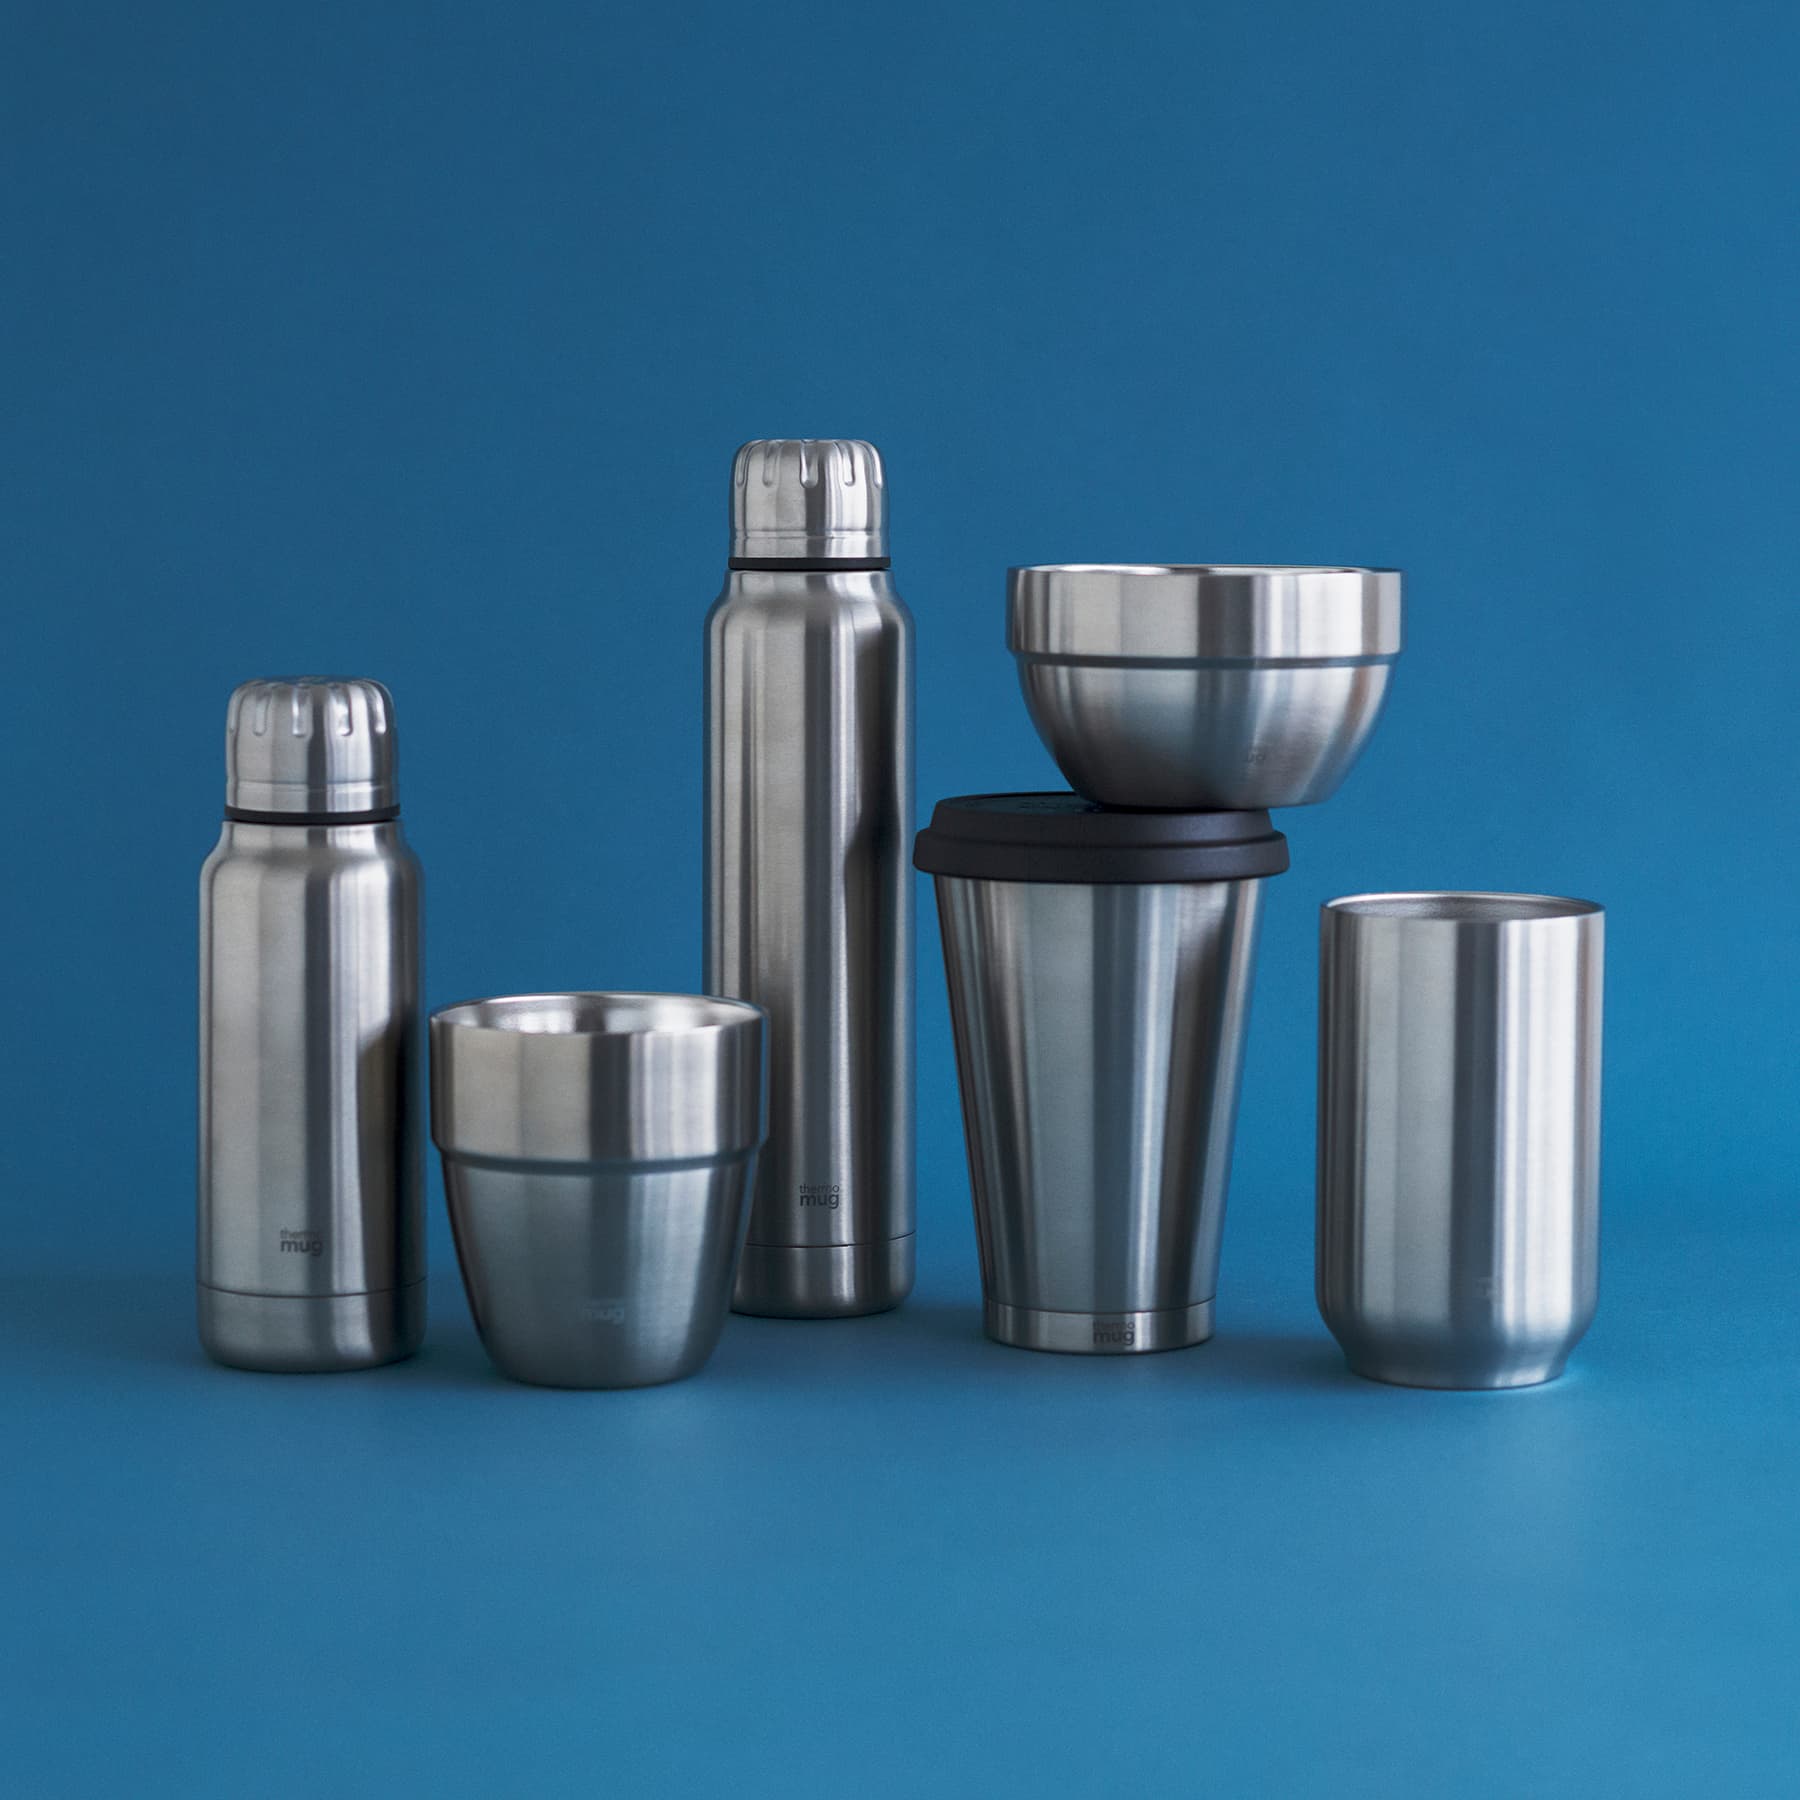 LIMITED (公式EC会員限定）Silverシリーズ – thermo mug OFFICIAL